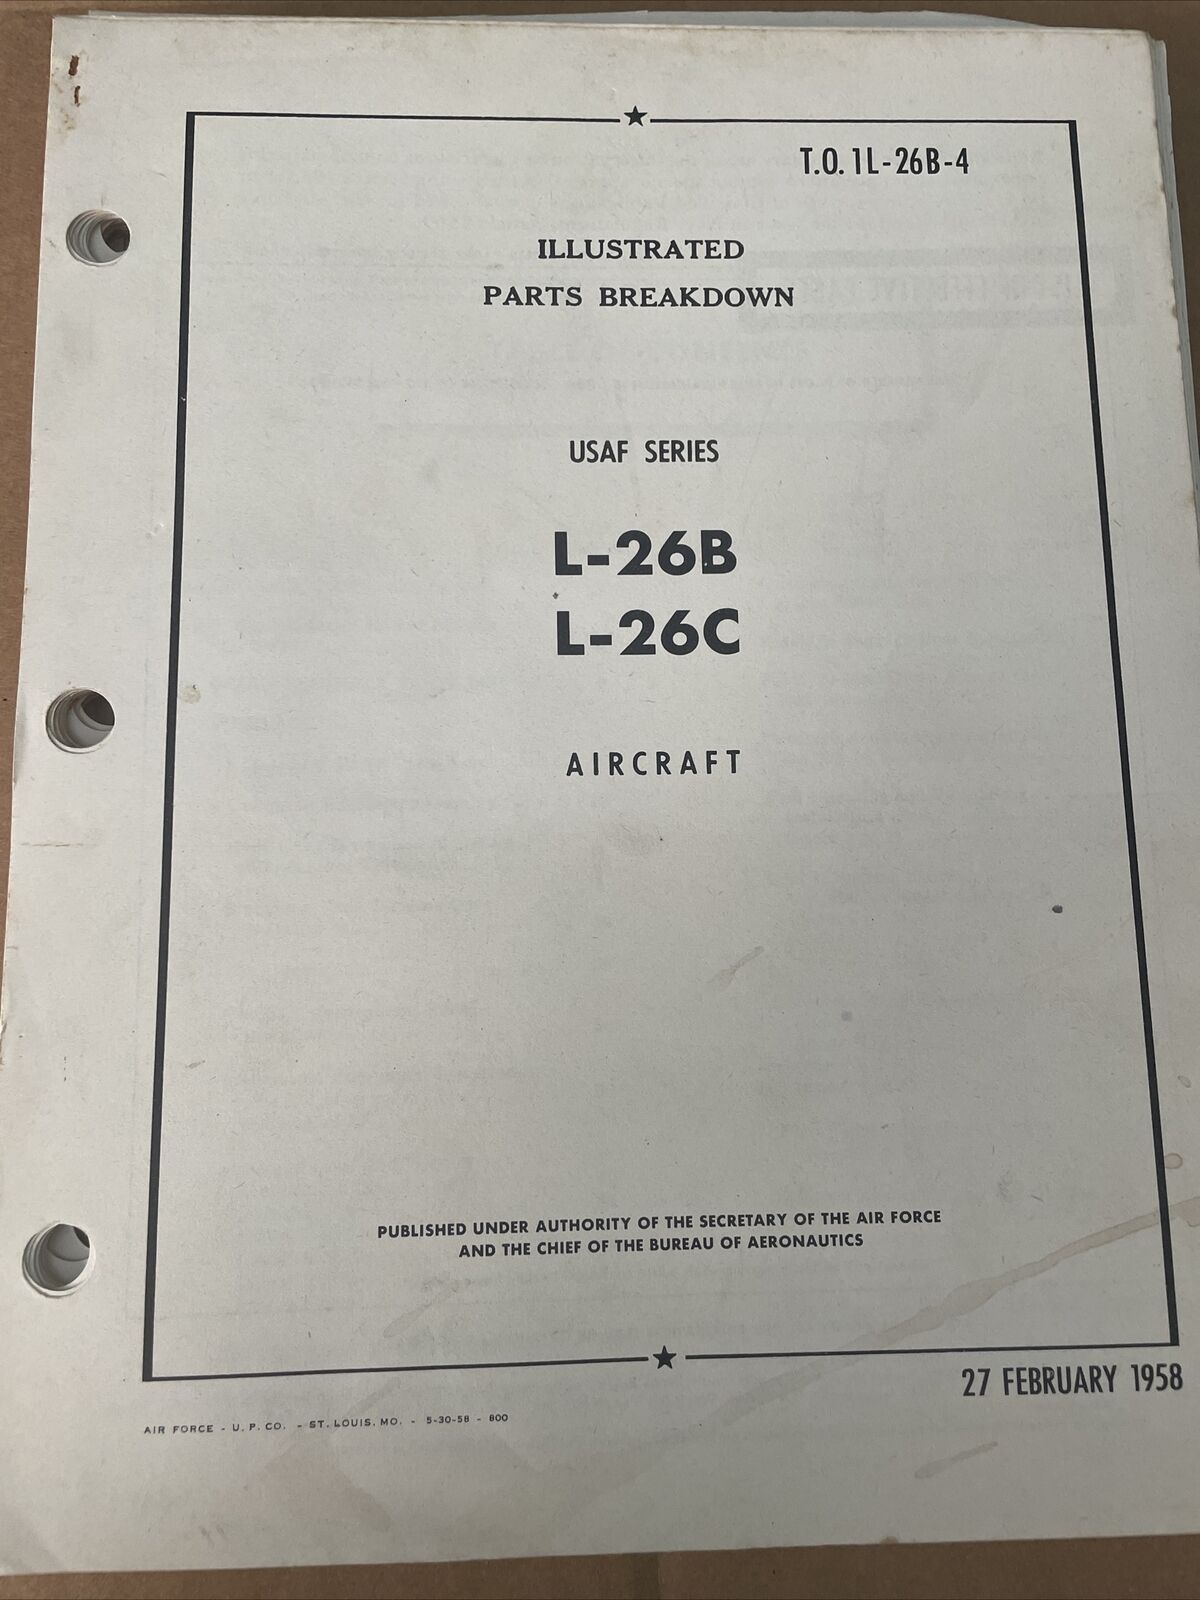 Technical Orders Illustrated Parts Breakdown USAF Series L-26B L-26C Aircraft